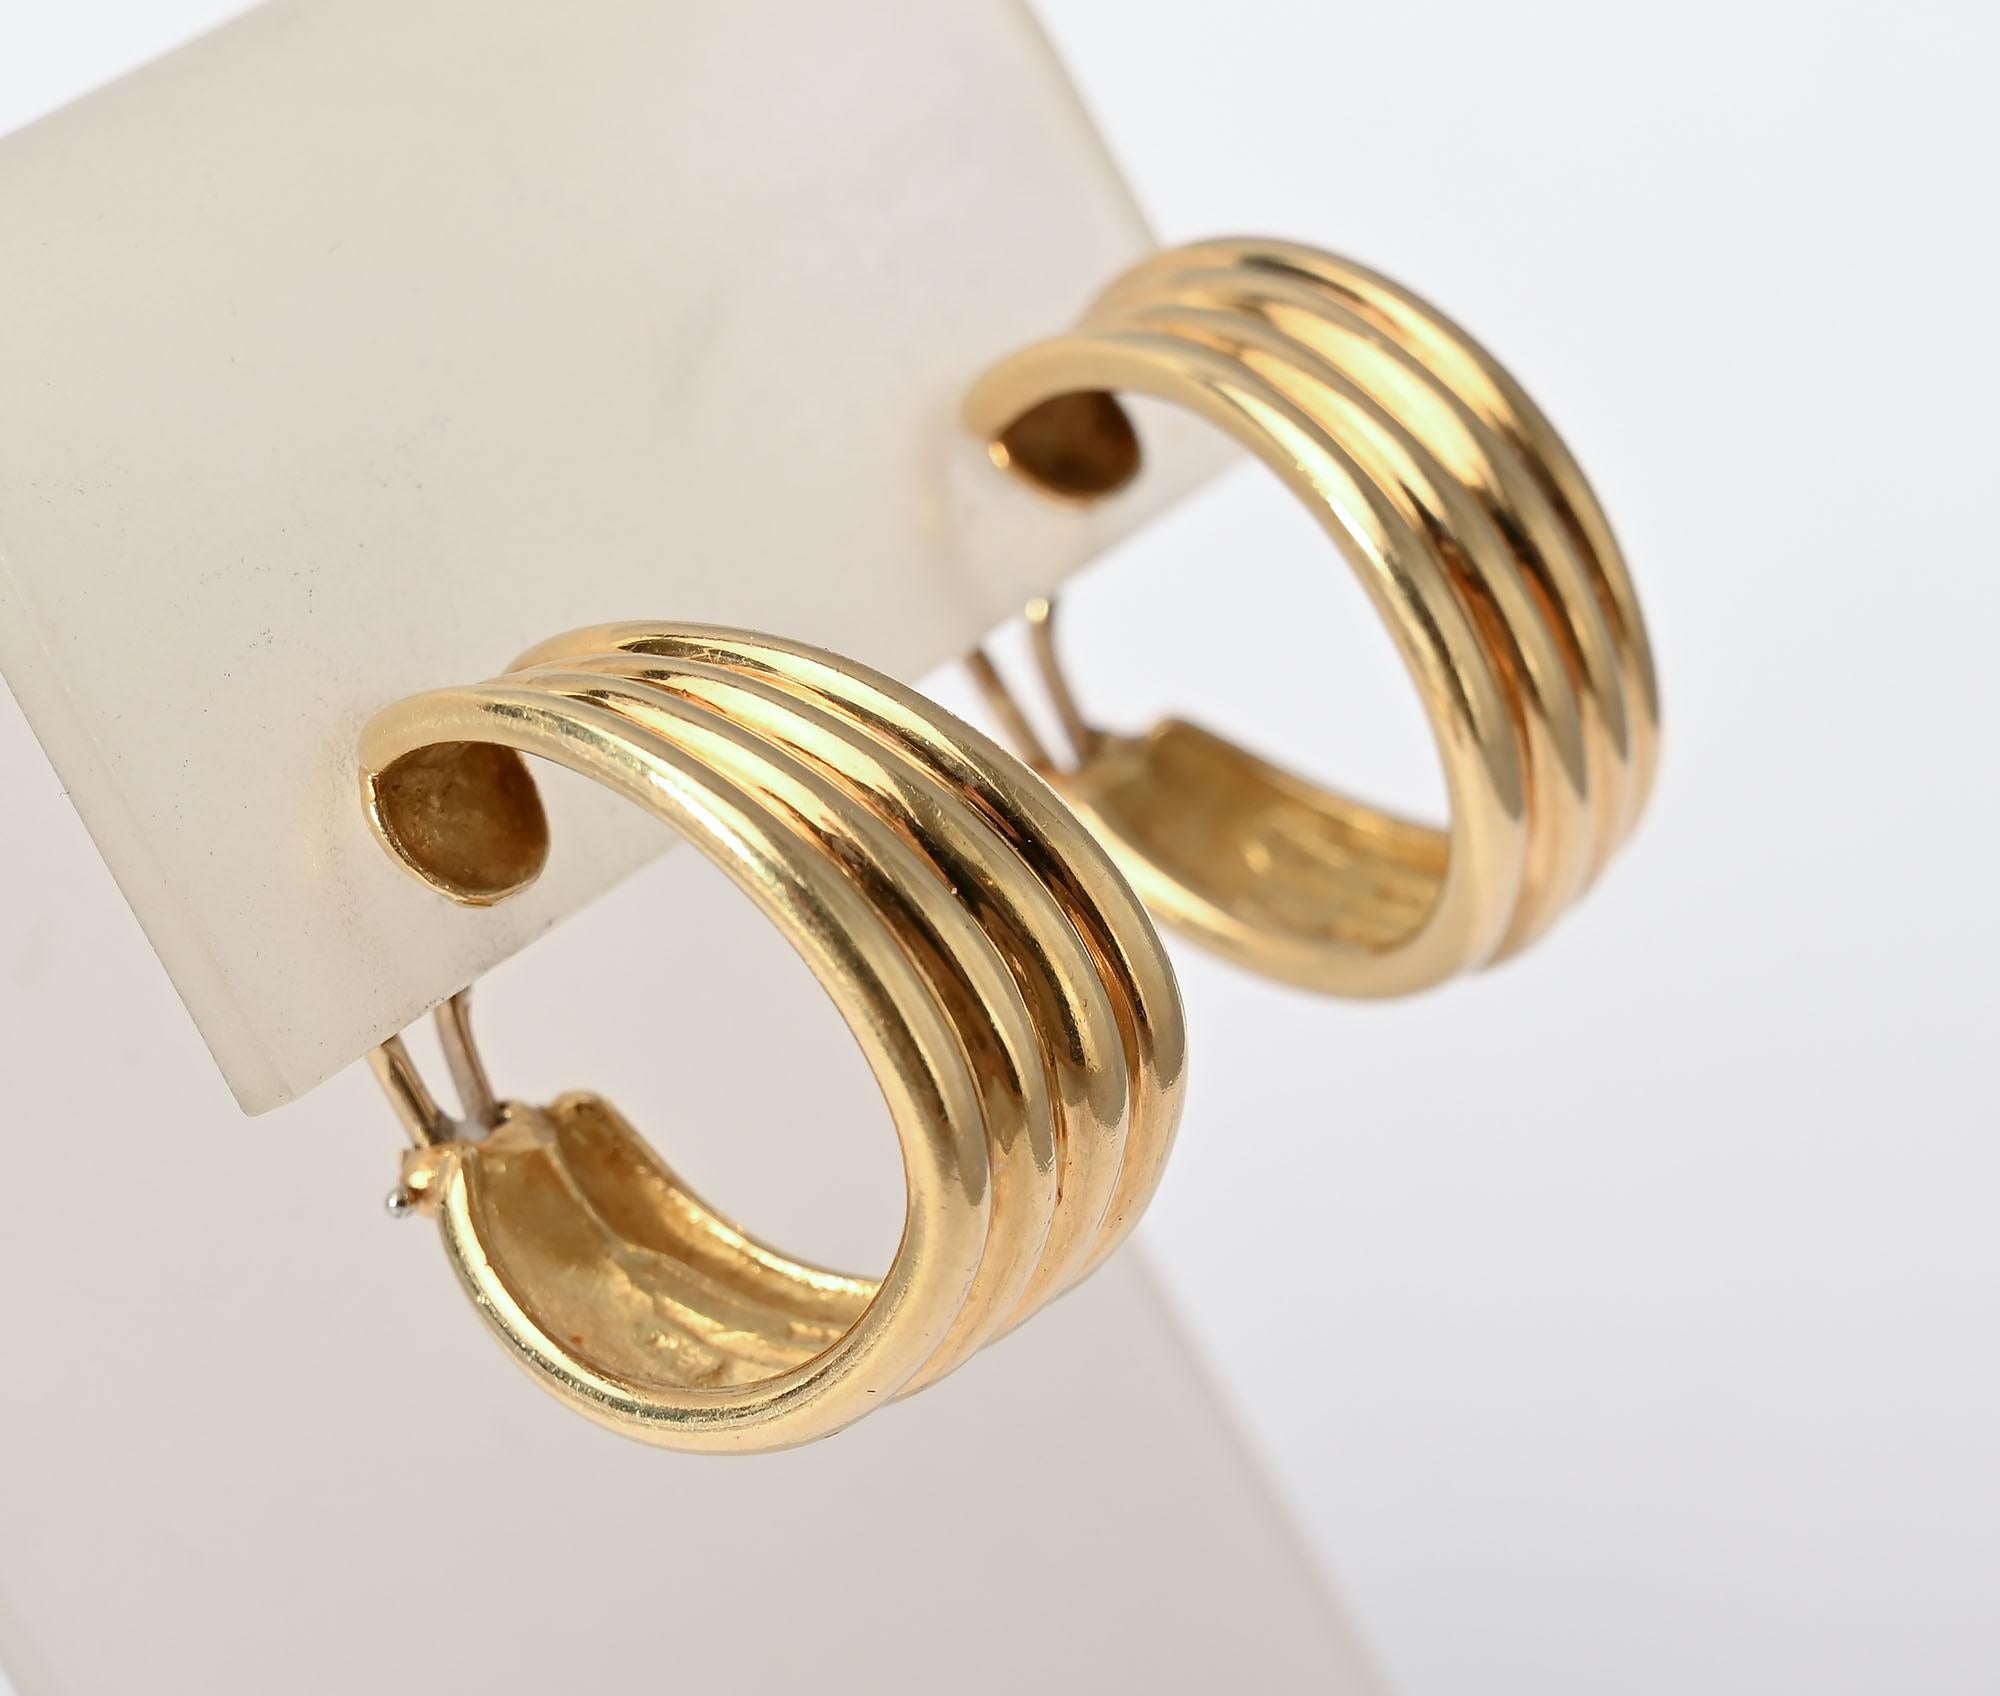 These Tiffany 18 karat gold ribbed hoop earrings are timeless. The ribbed surface and slight wave to the hoop jazz them up.
Clip backs can be converted to posts. The earrings measure 15/16